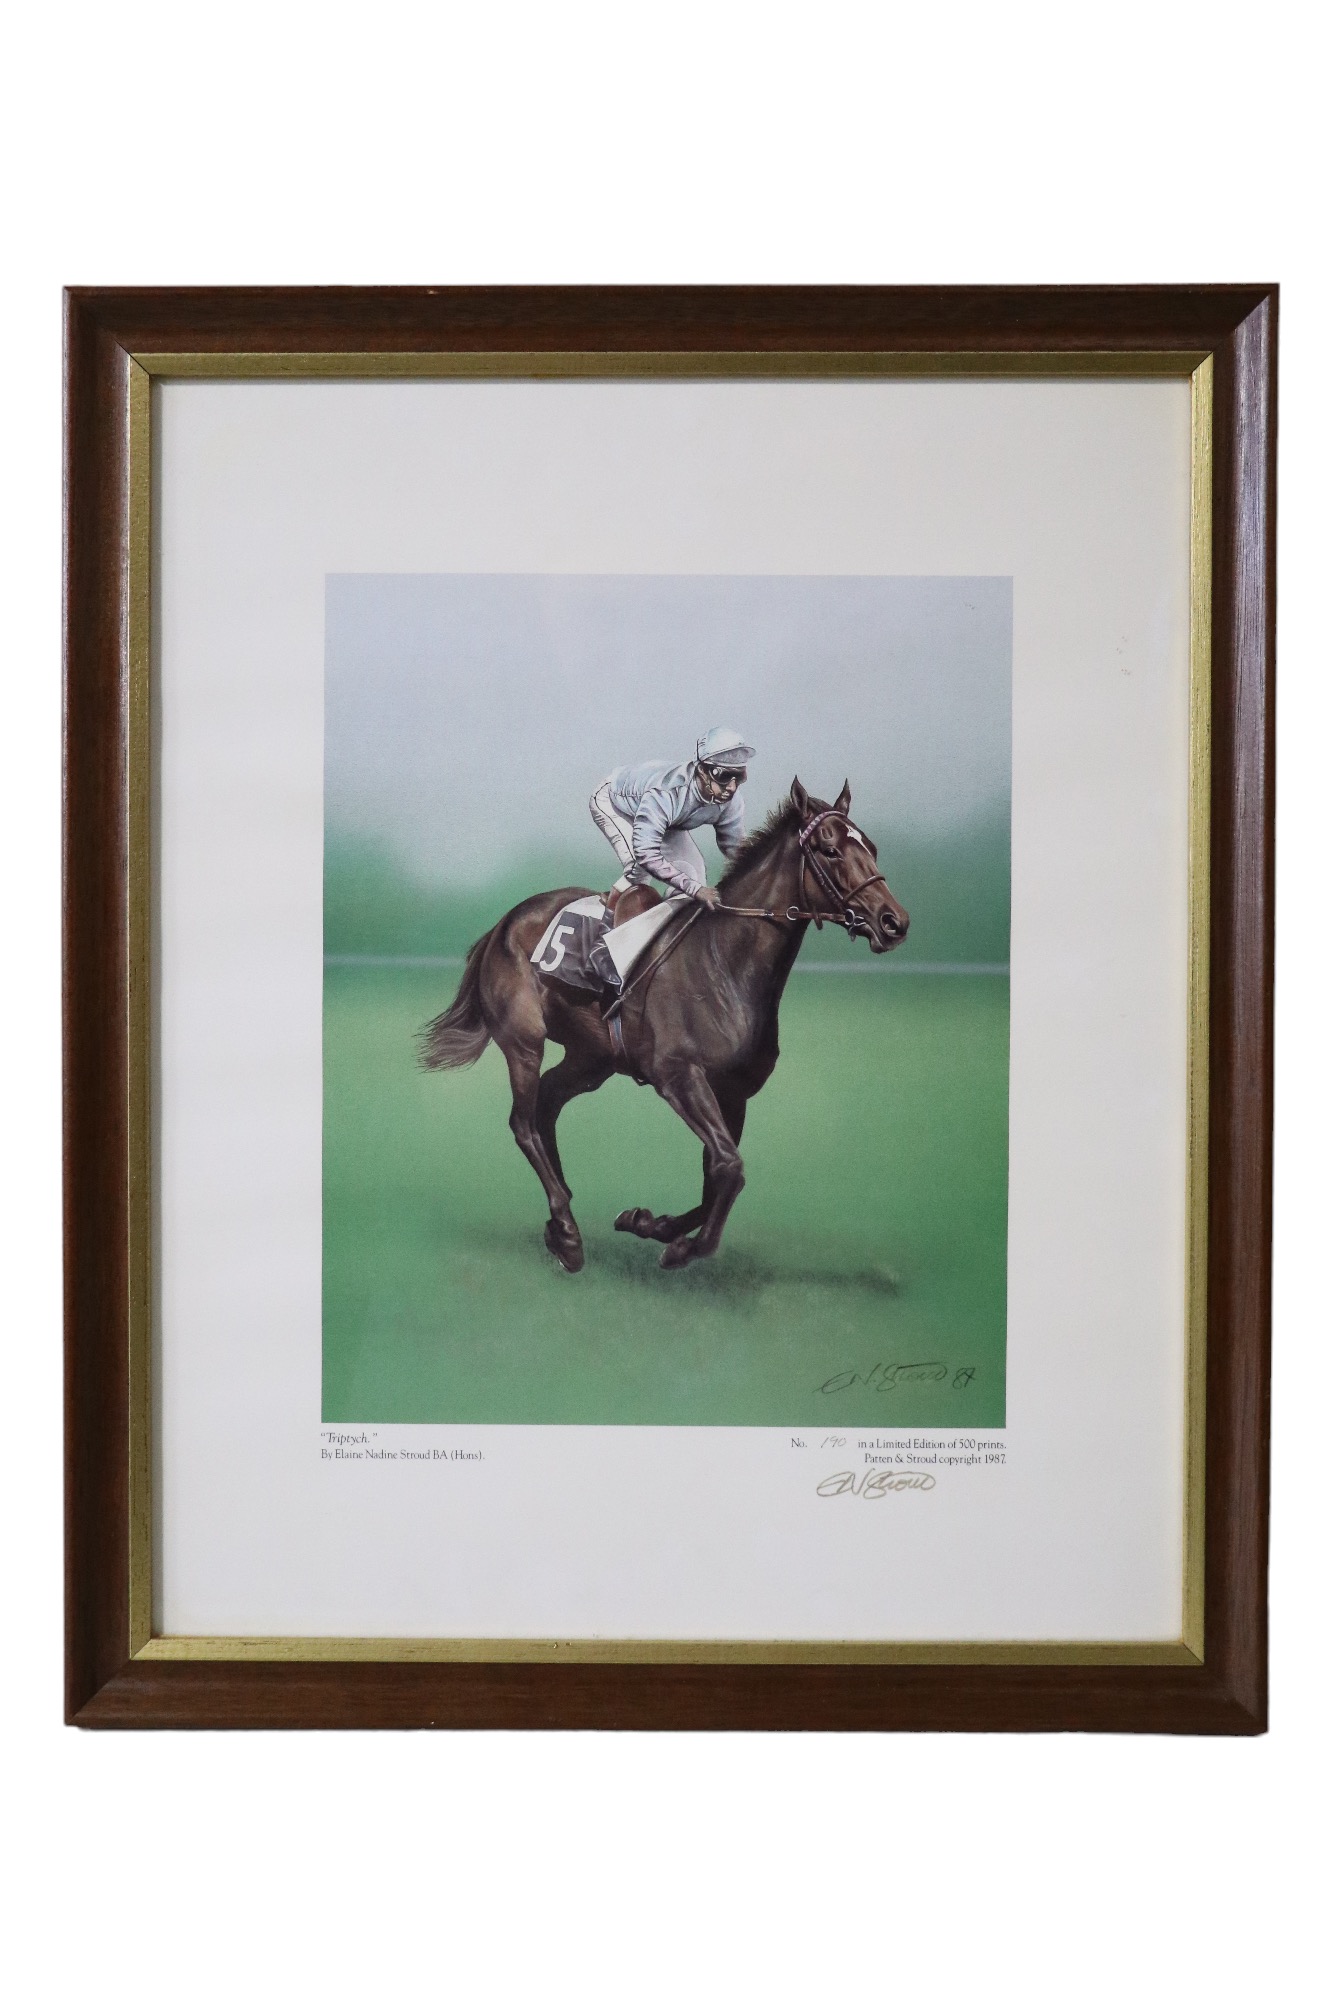 After Elaine Nadine Stroud "Desert Orchid and Kildimo", "Triptych", "Dancing Brave and Pat - Image 3 of 5